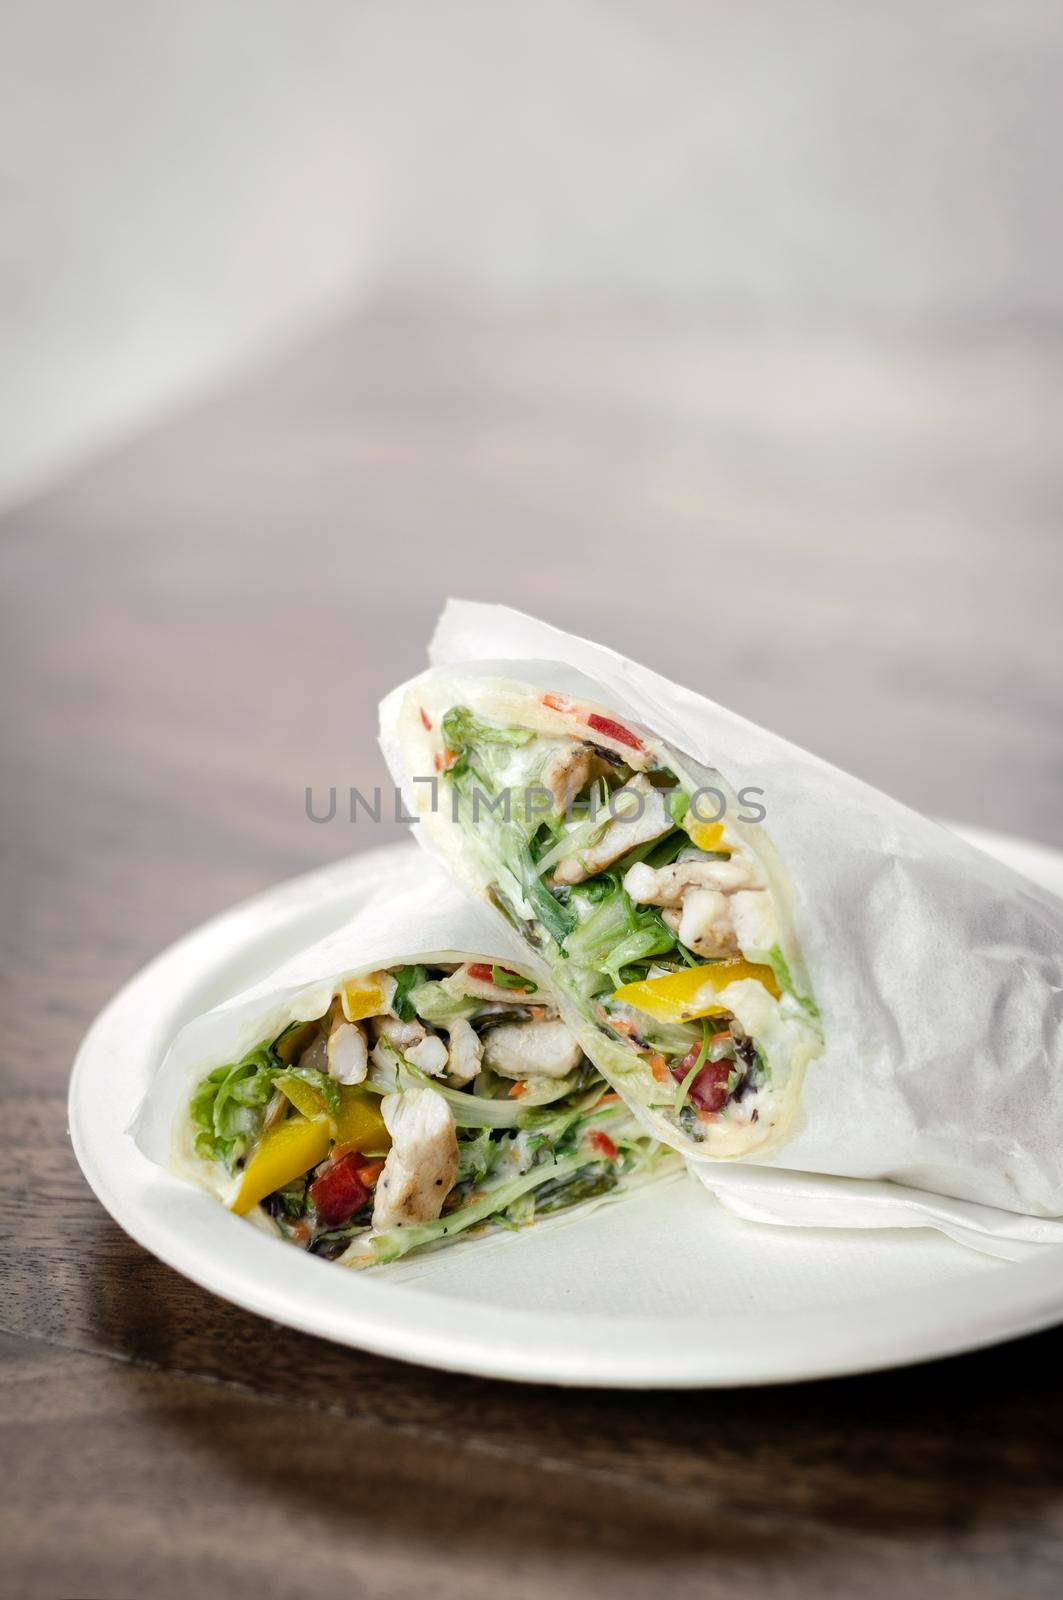 chicken salad wrap in white paper on wood table background by jackmalipan